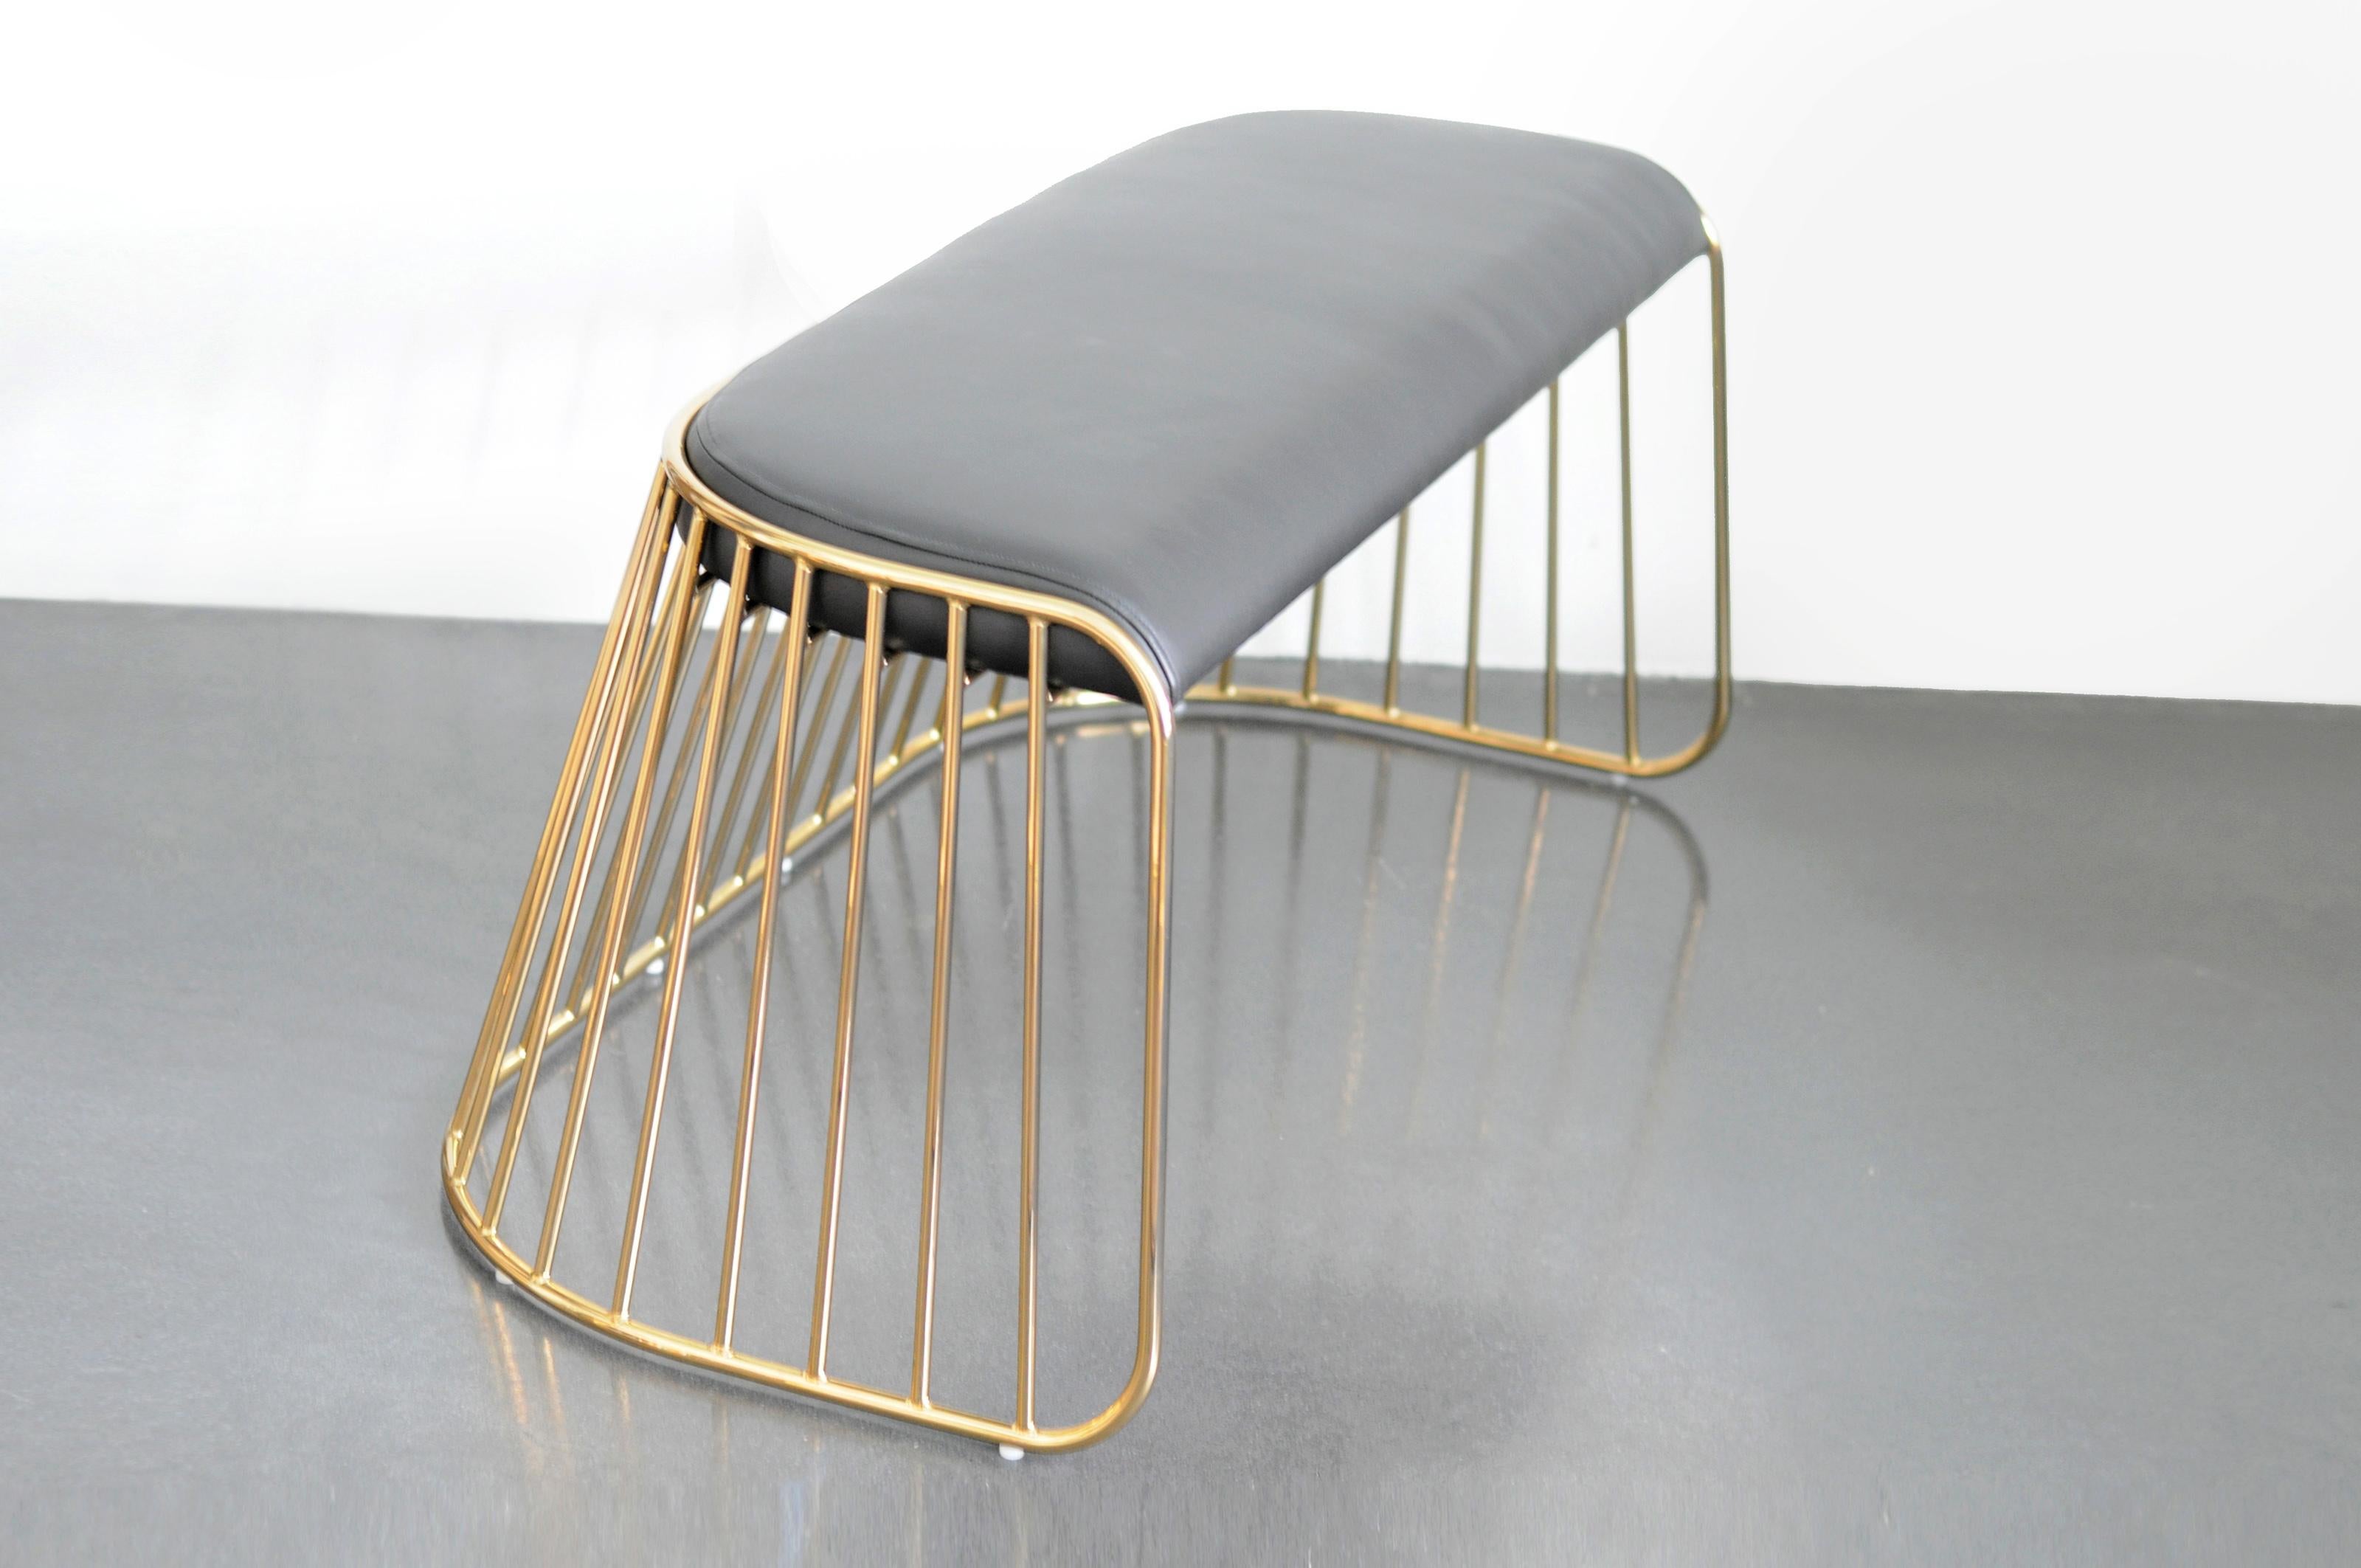 Bride’s Veil Double Low Stool by Phase Design
Dimensions: D 52,1 x W 109,2 x H 45,7 cm.
Materials: Leather, steel and smoked brass.

Solid steel bar available in a smoked brass, polished chrome, burnt copper, or powder coat finish with upholstered